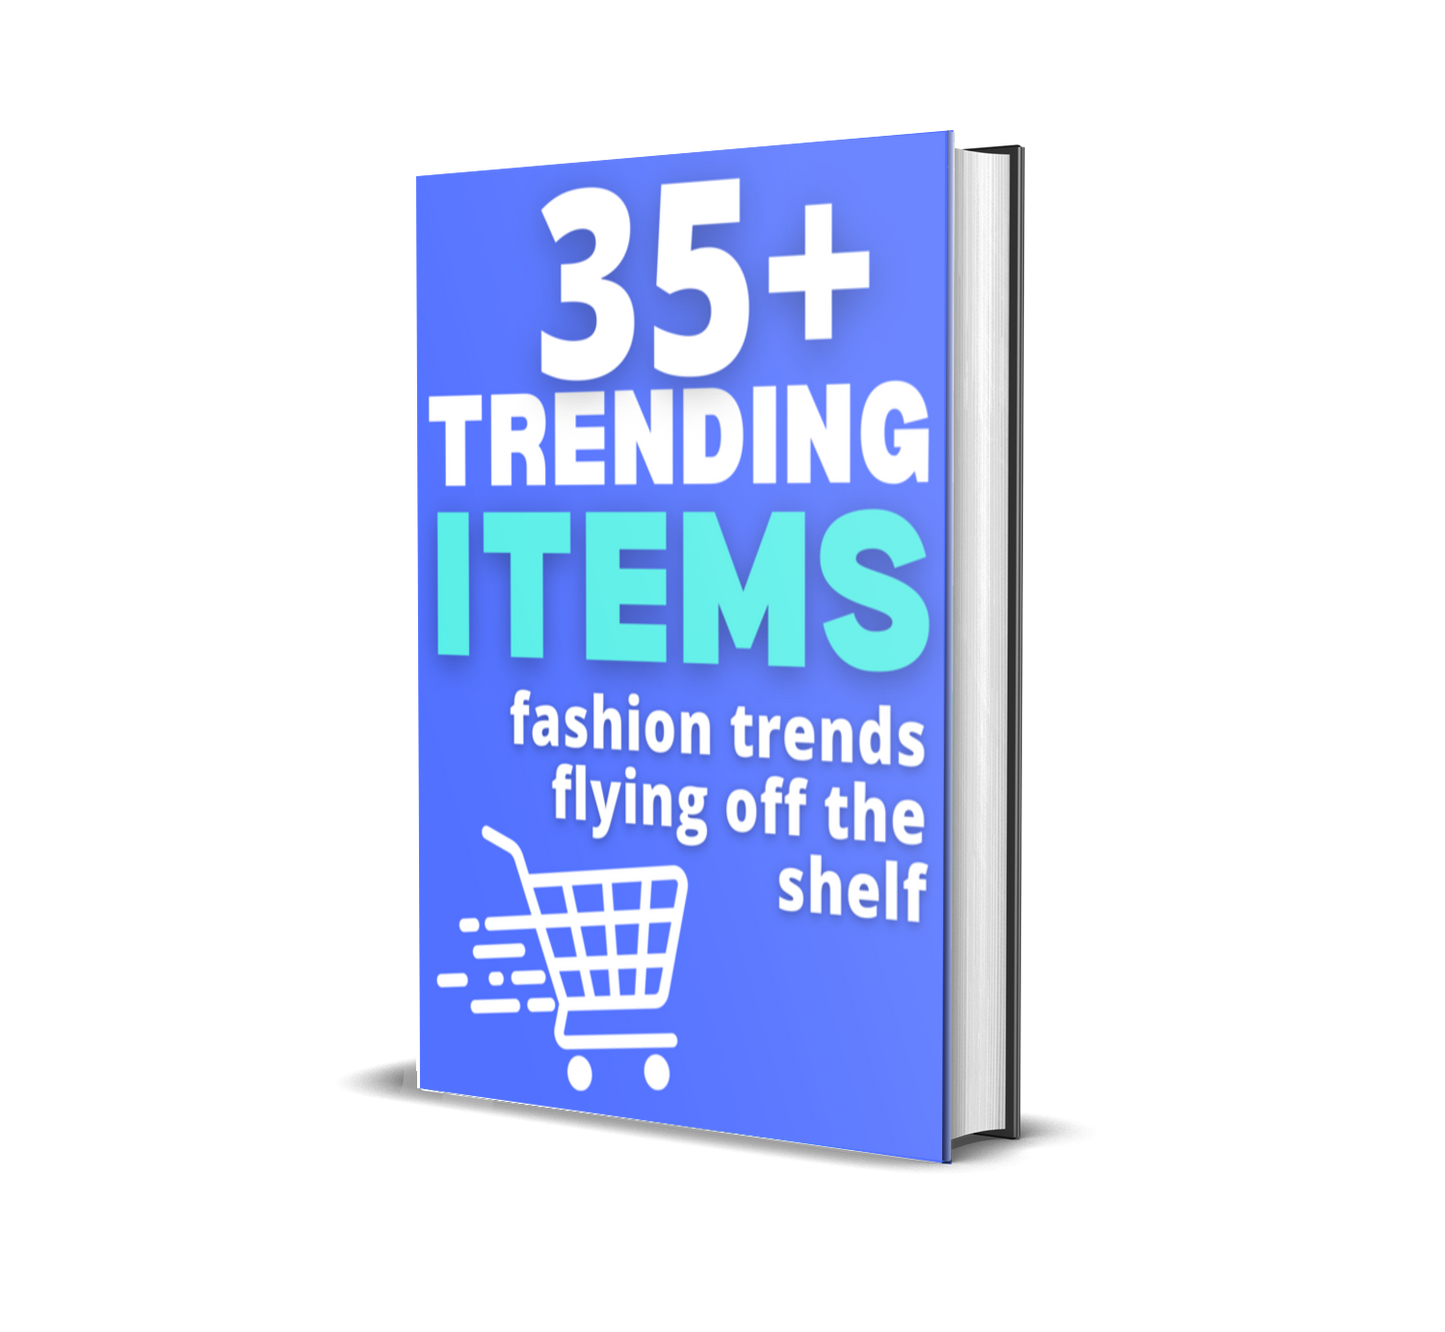 TRENDING ITEMS: CURRENT FASHIONS FLYING OFF THE SHELF